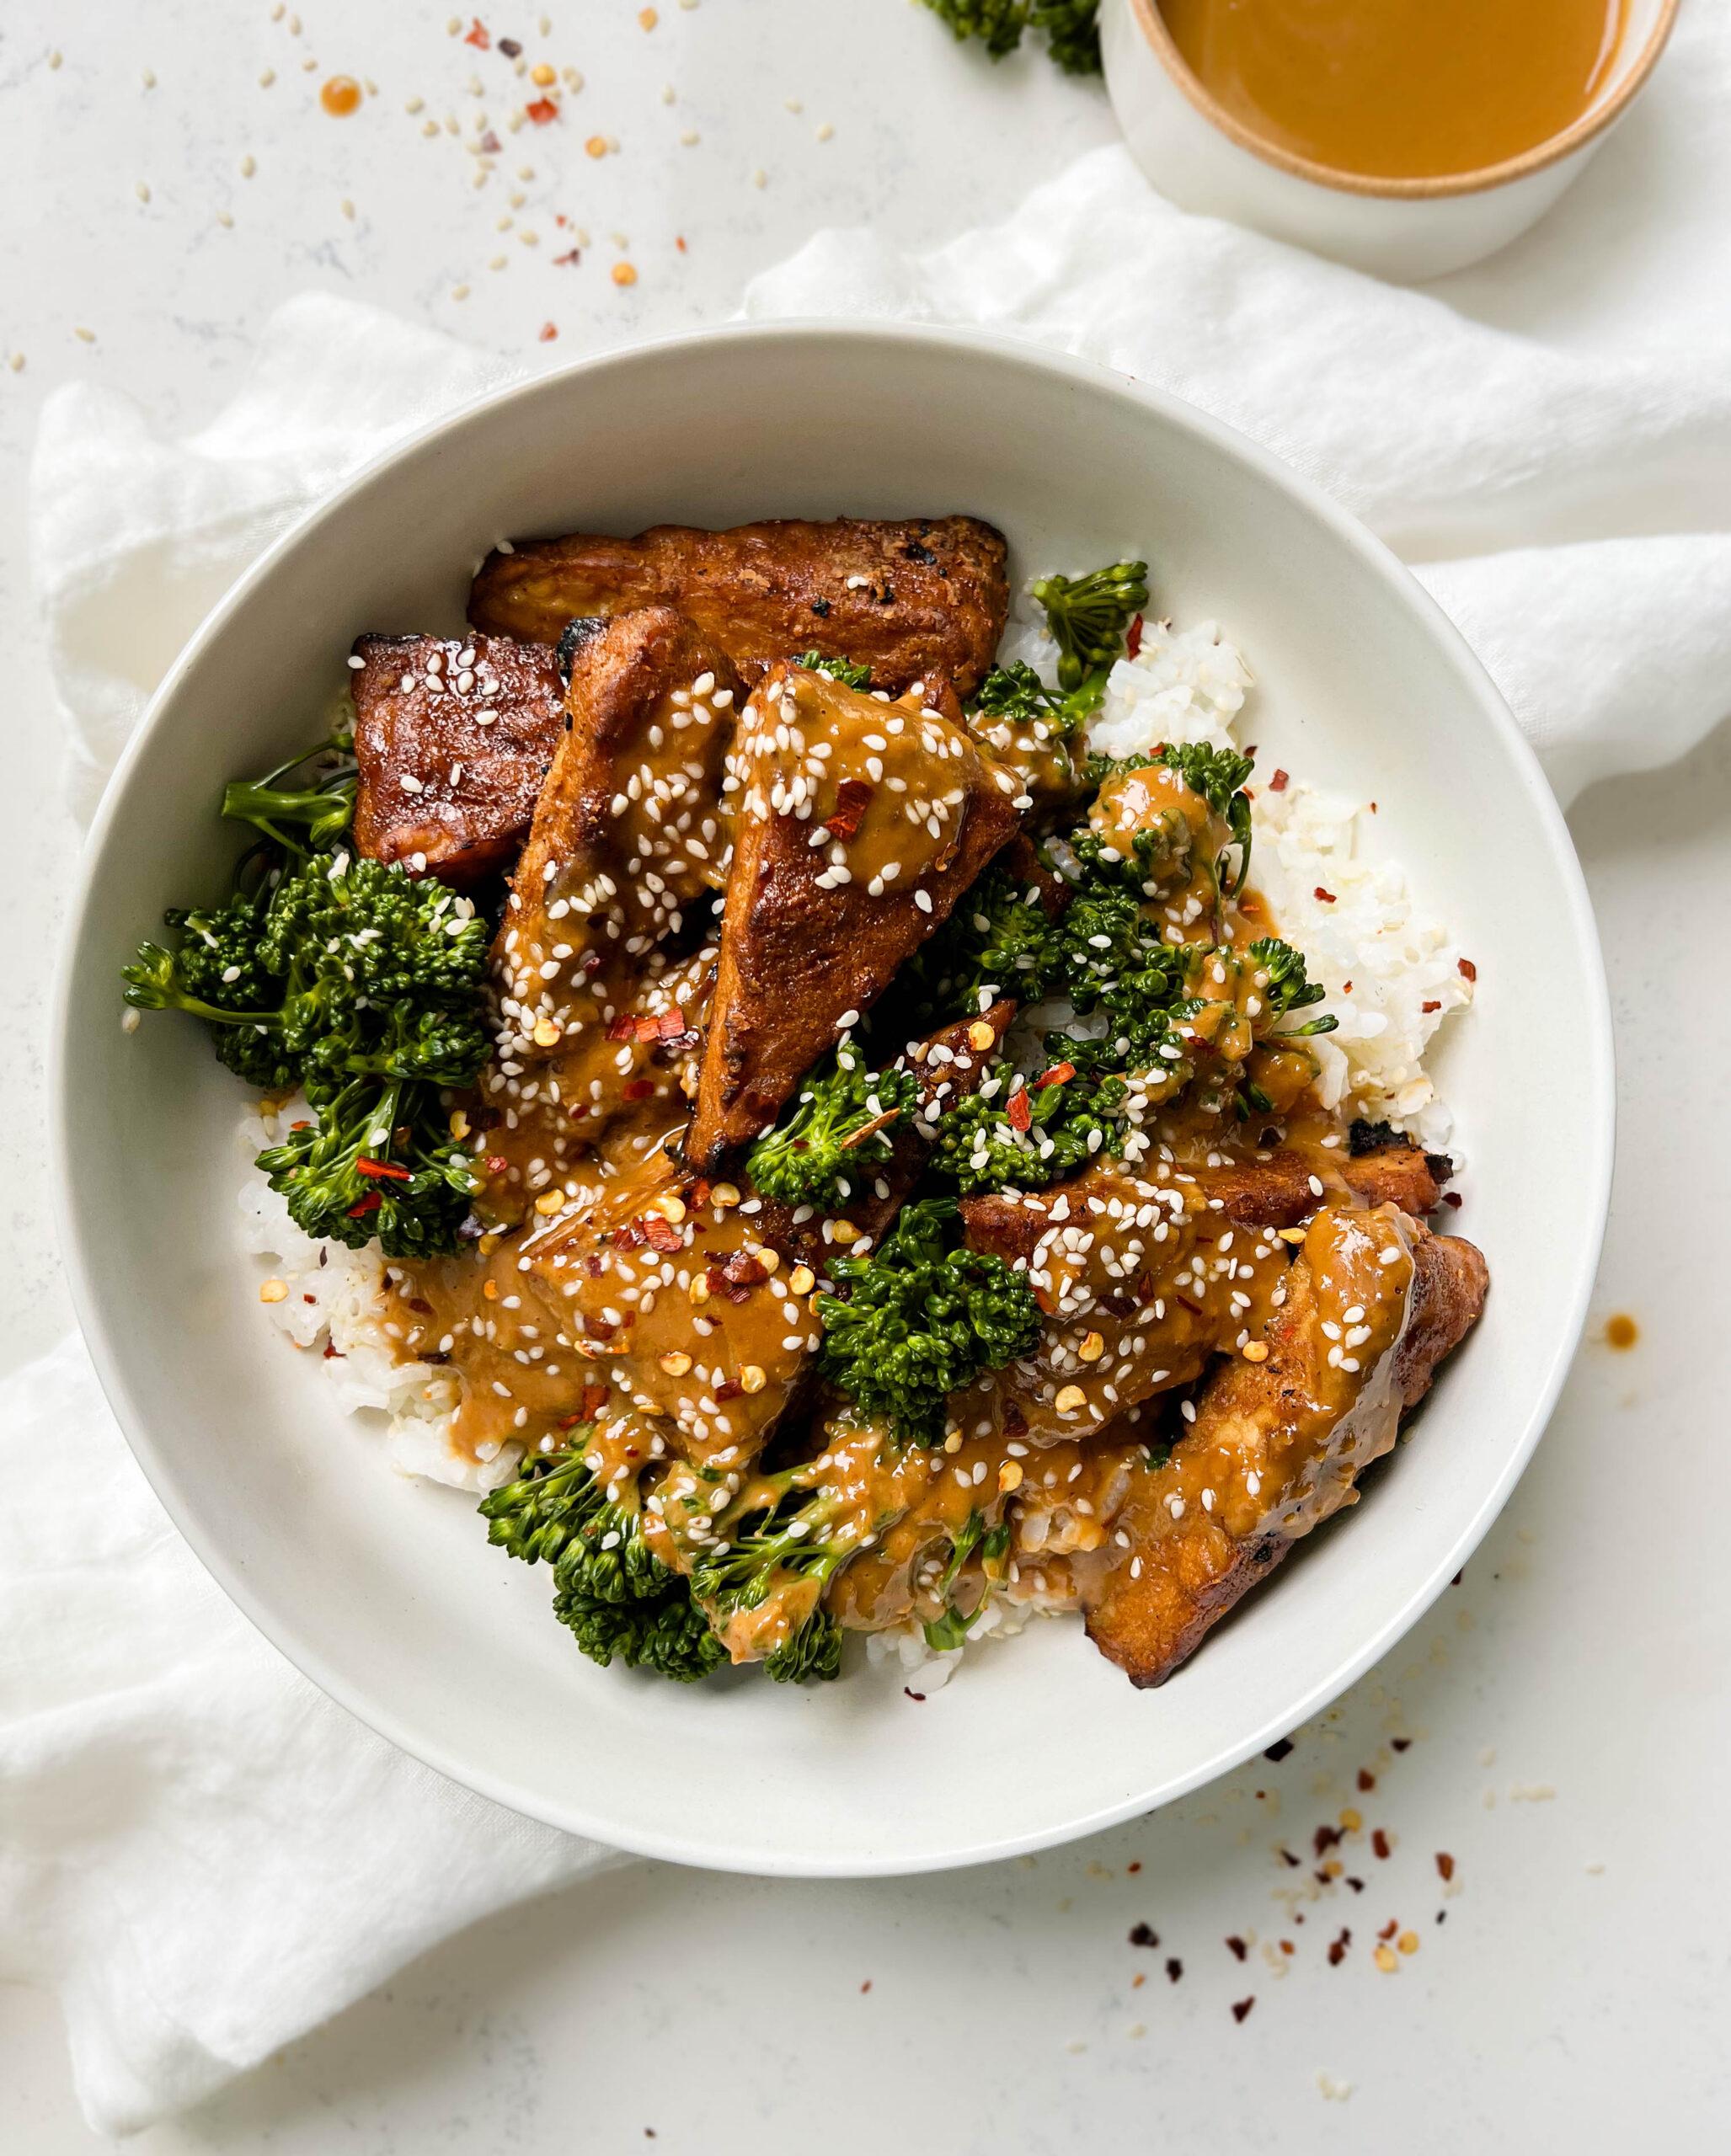 marinated peanut tempeh with white rice and broccoli next to a white linen cloth